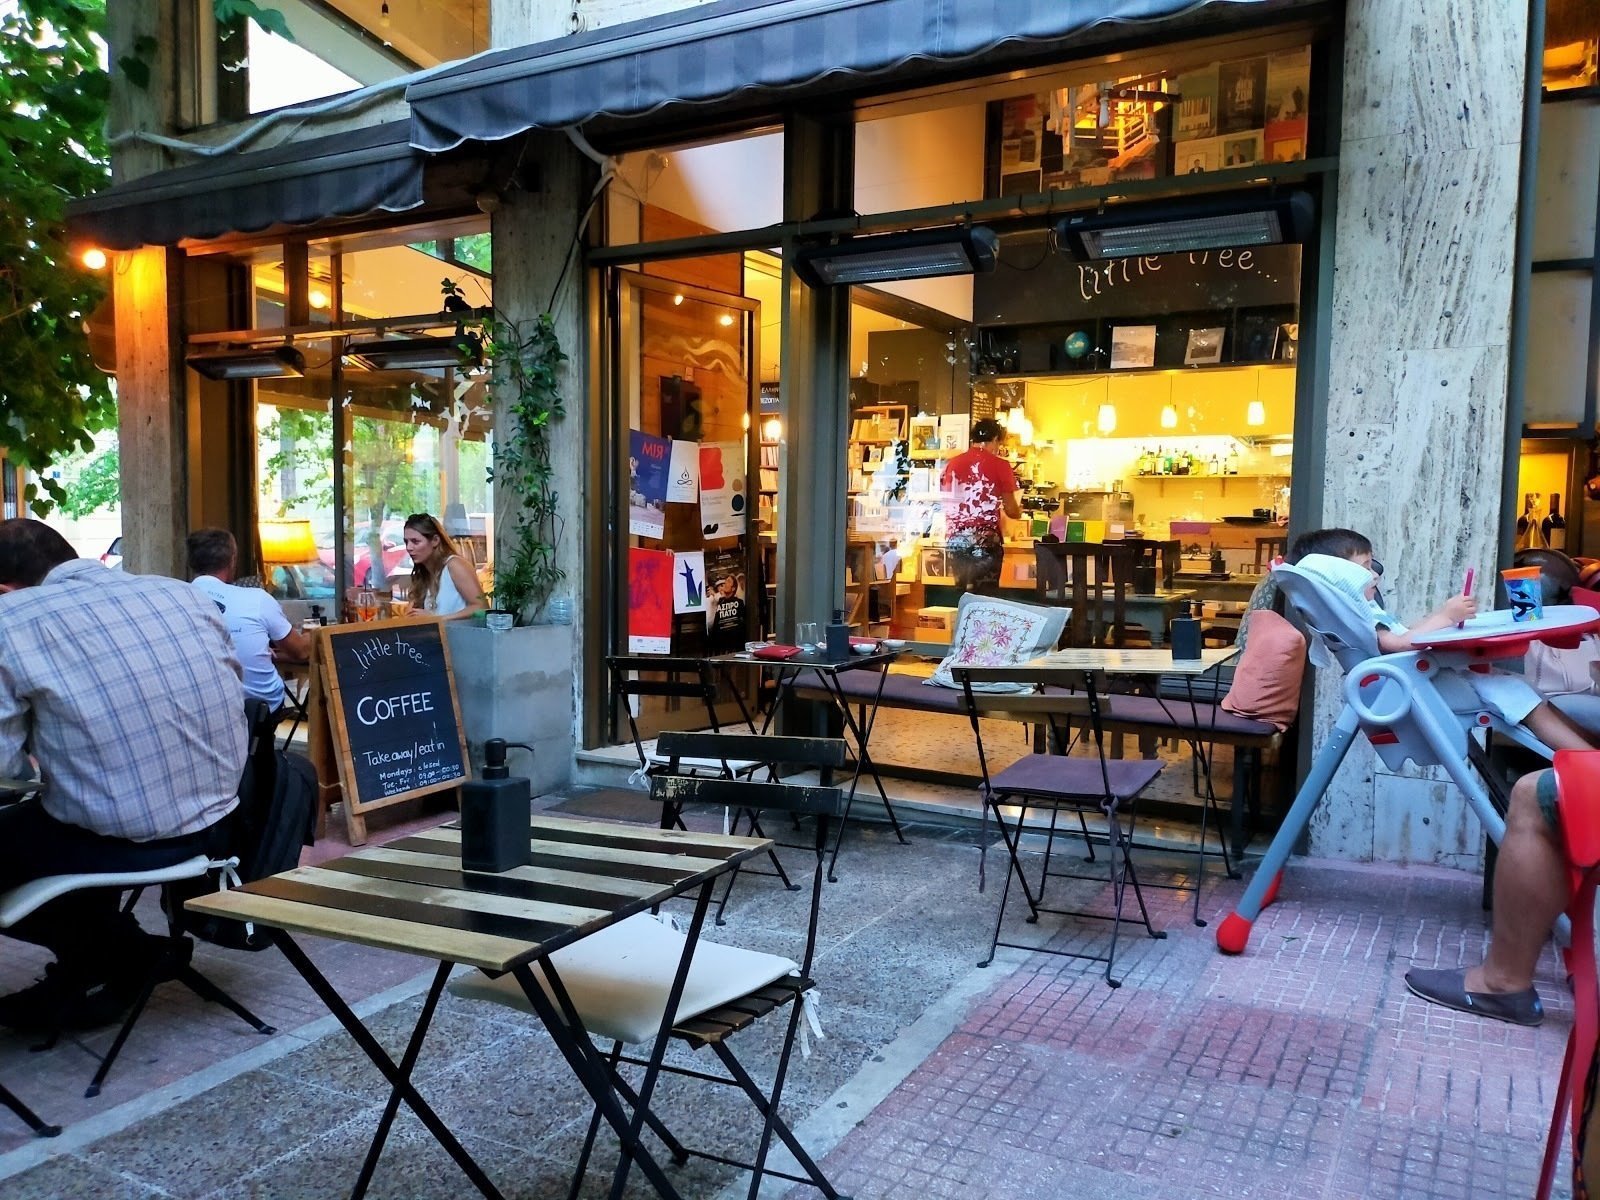 <span class="translation_missing" title="translation missing: en.meta.location_title, location_name: Little Tree Books and Coffee, city: Athens">Location Title</span>